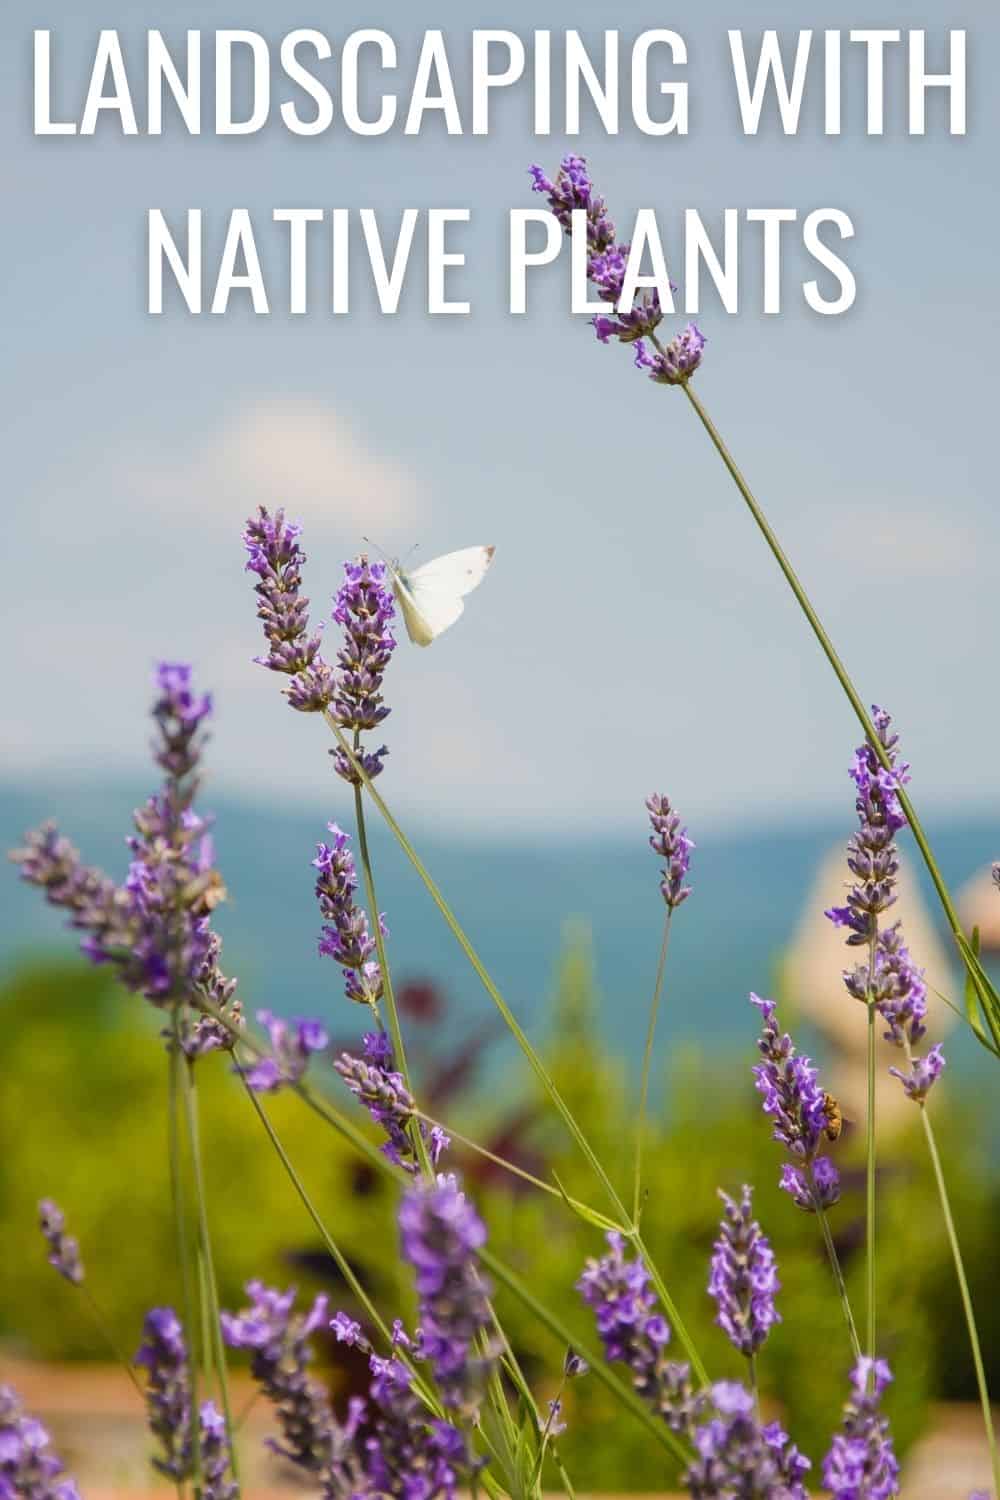 Landscaping with native plants